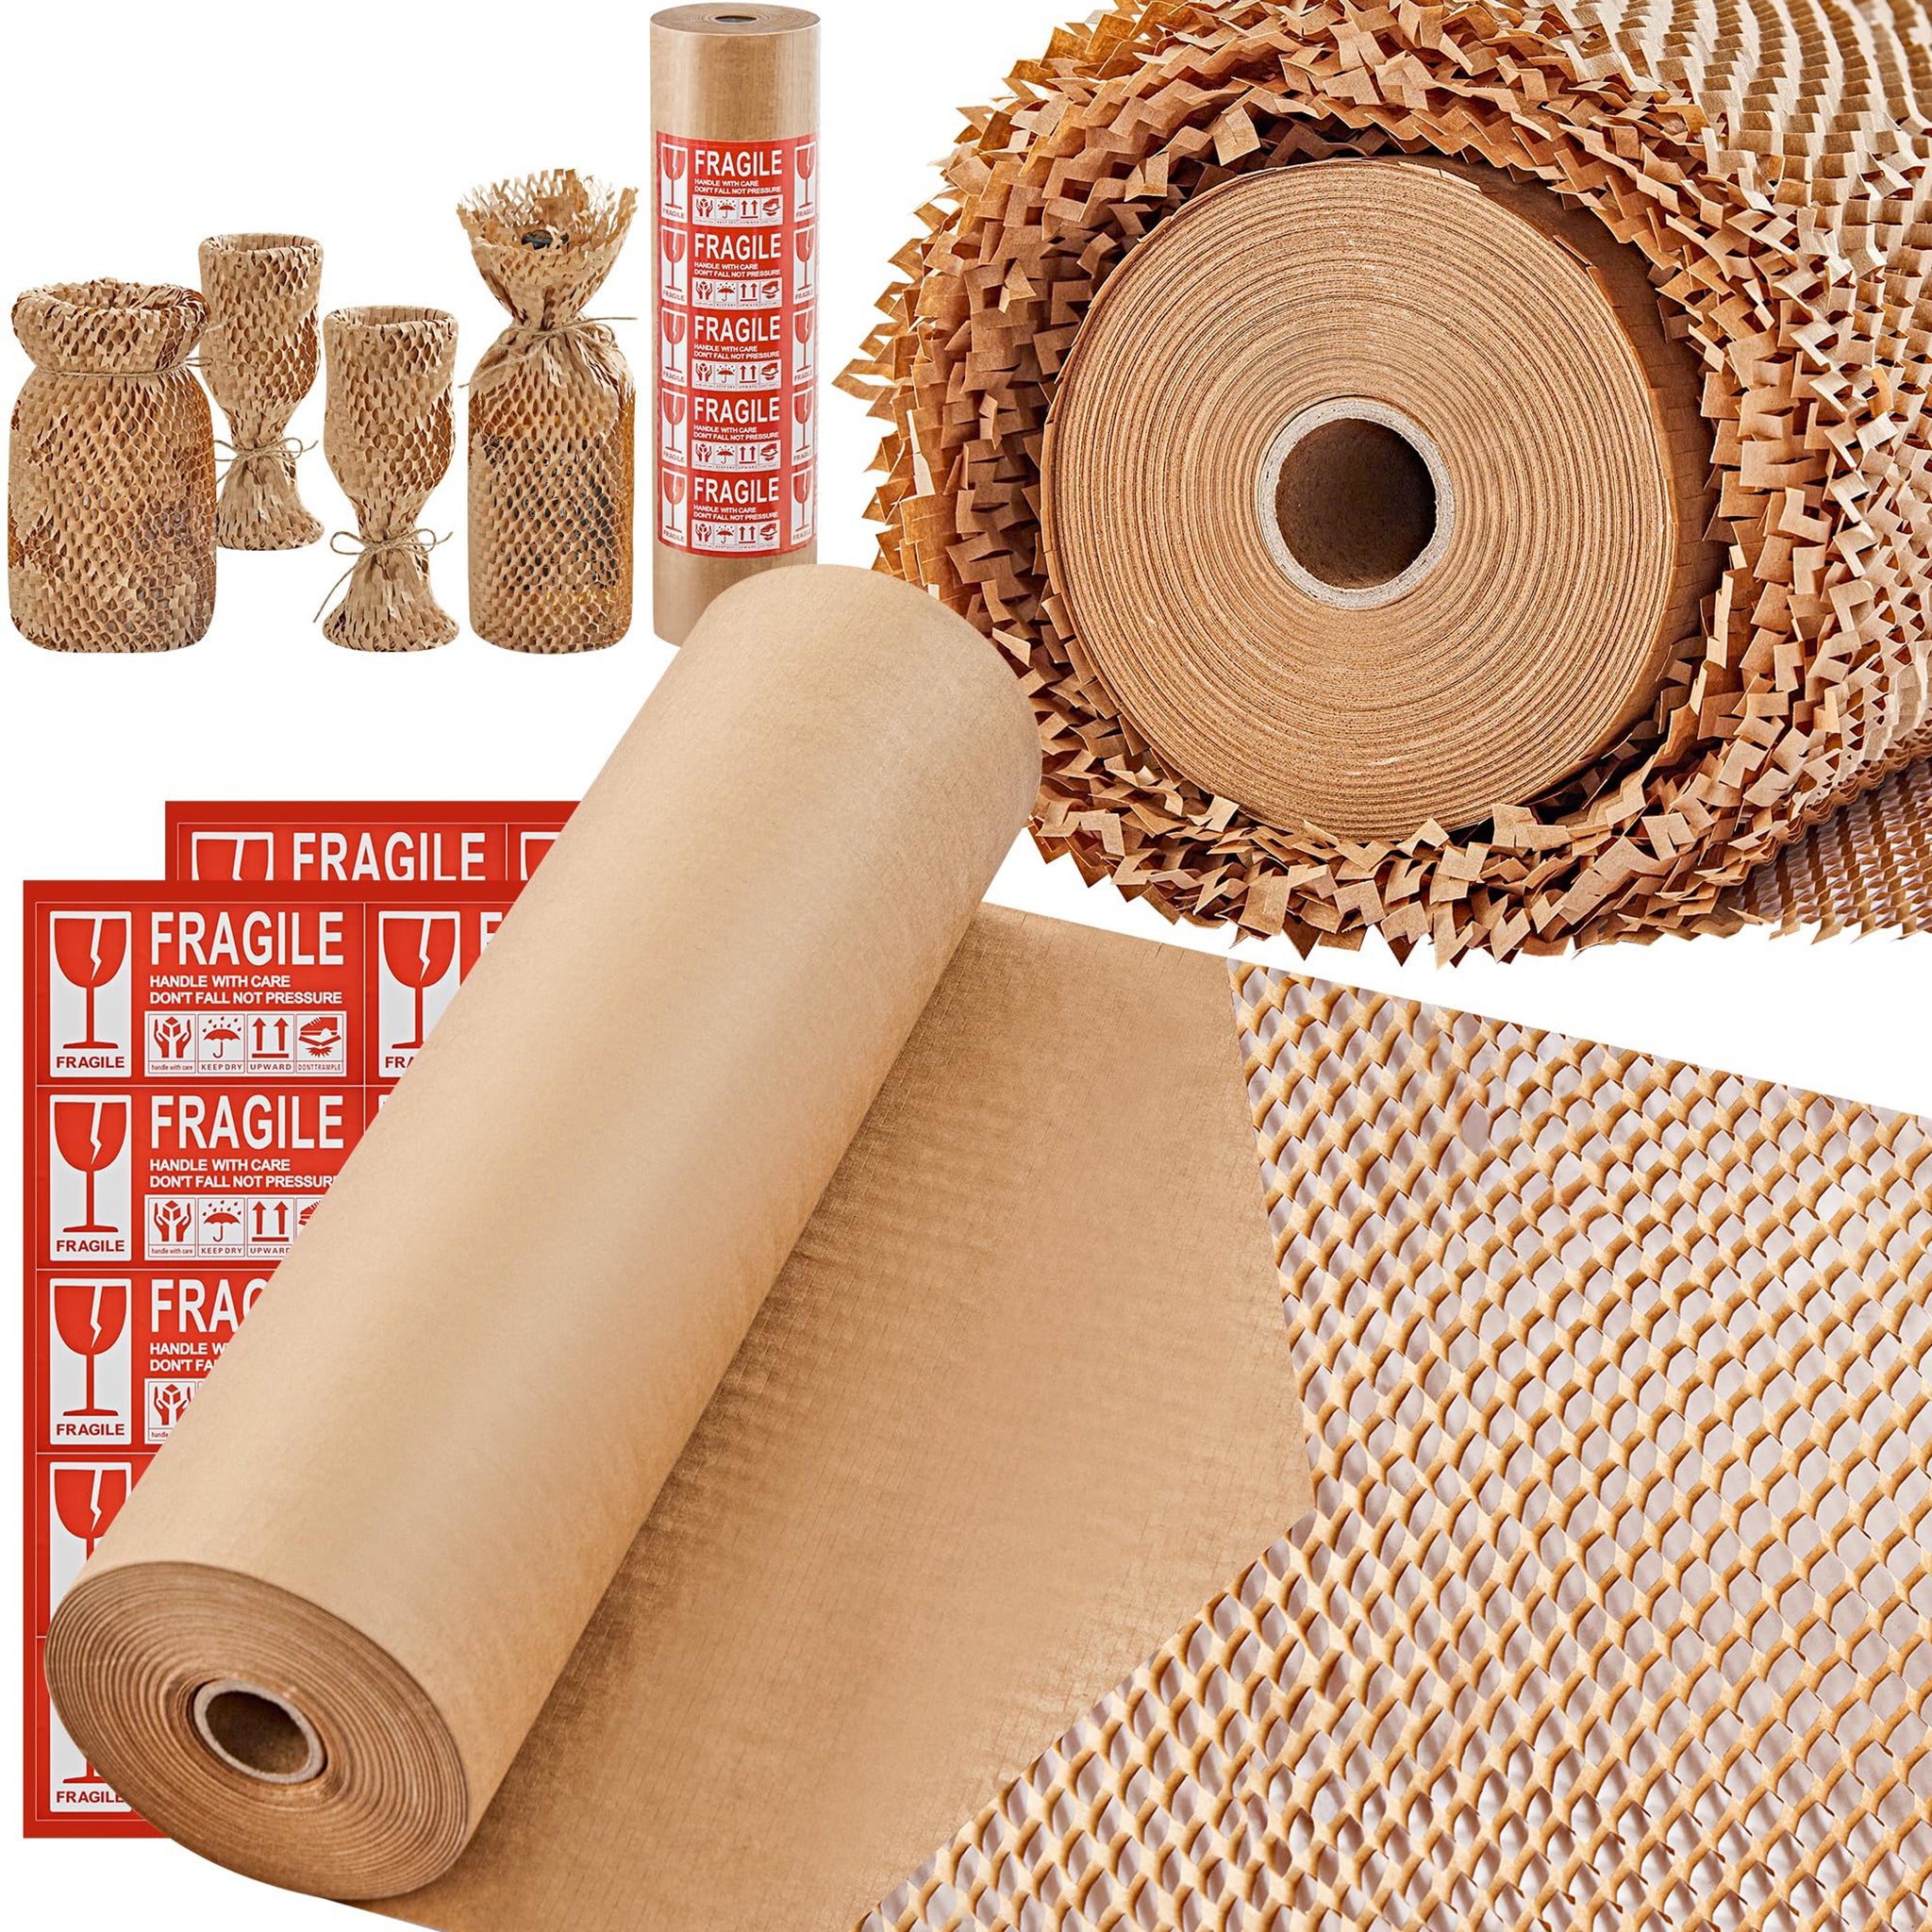  Honeycomb Packing Paper 15x165', Bubble Paper Wrap for Packing/Shipping/Moving,Eco  Friendly Packing wrap for Moving,Recyclable Honeycomb Paper Moving,With 24  Fragile Sticker Labels : Office Products